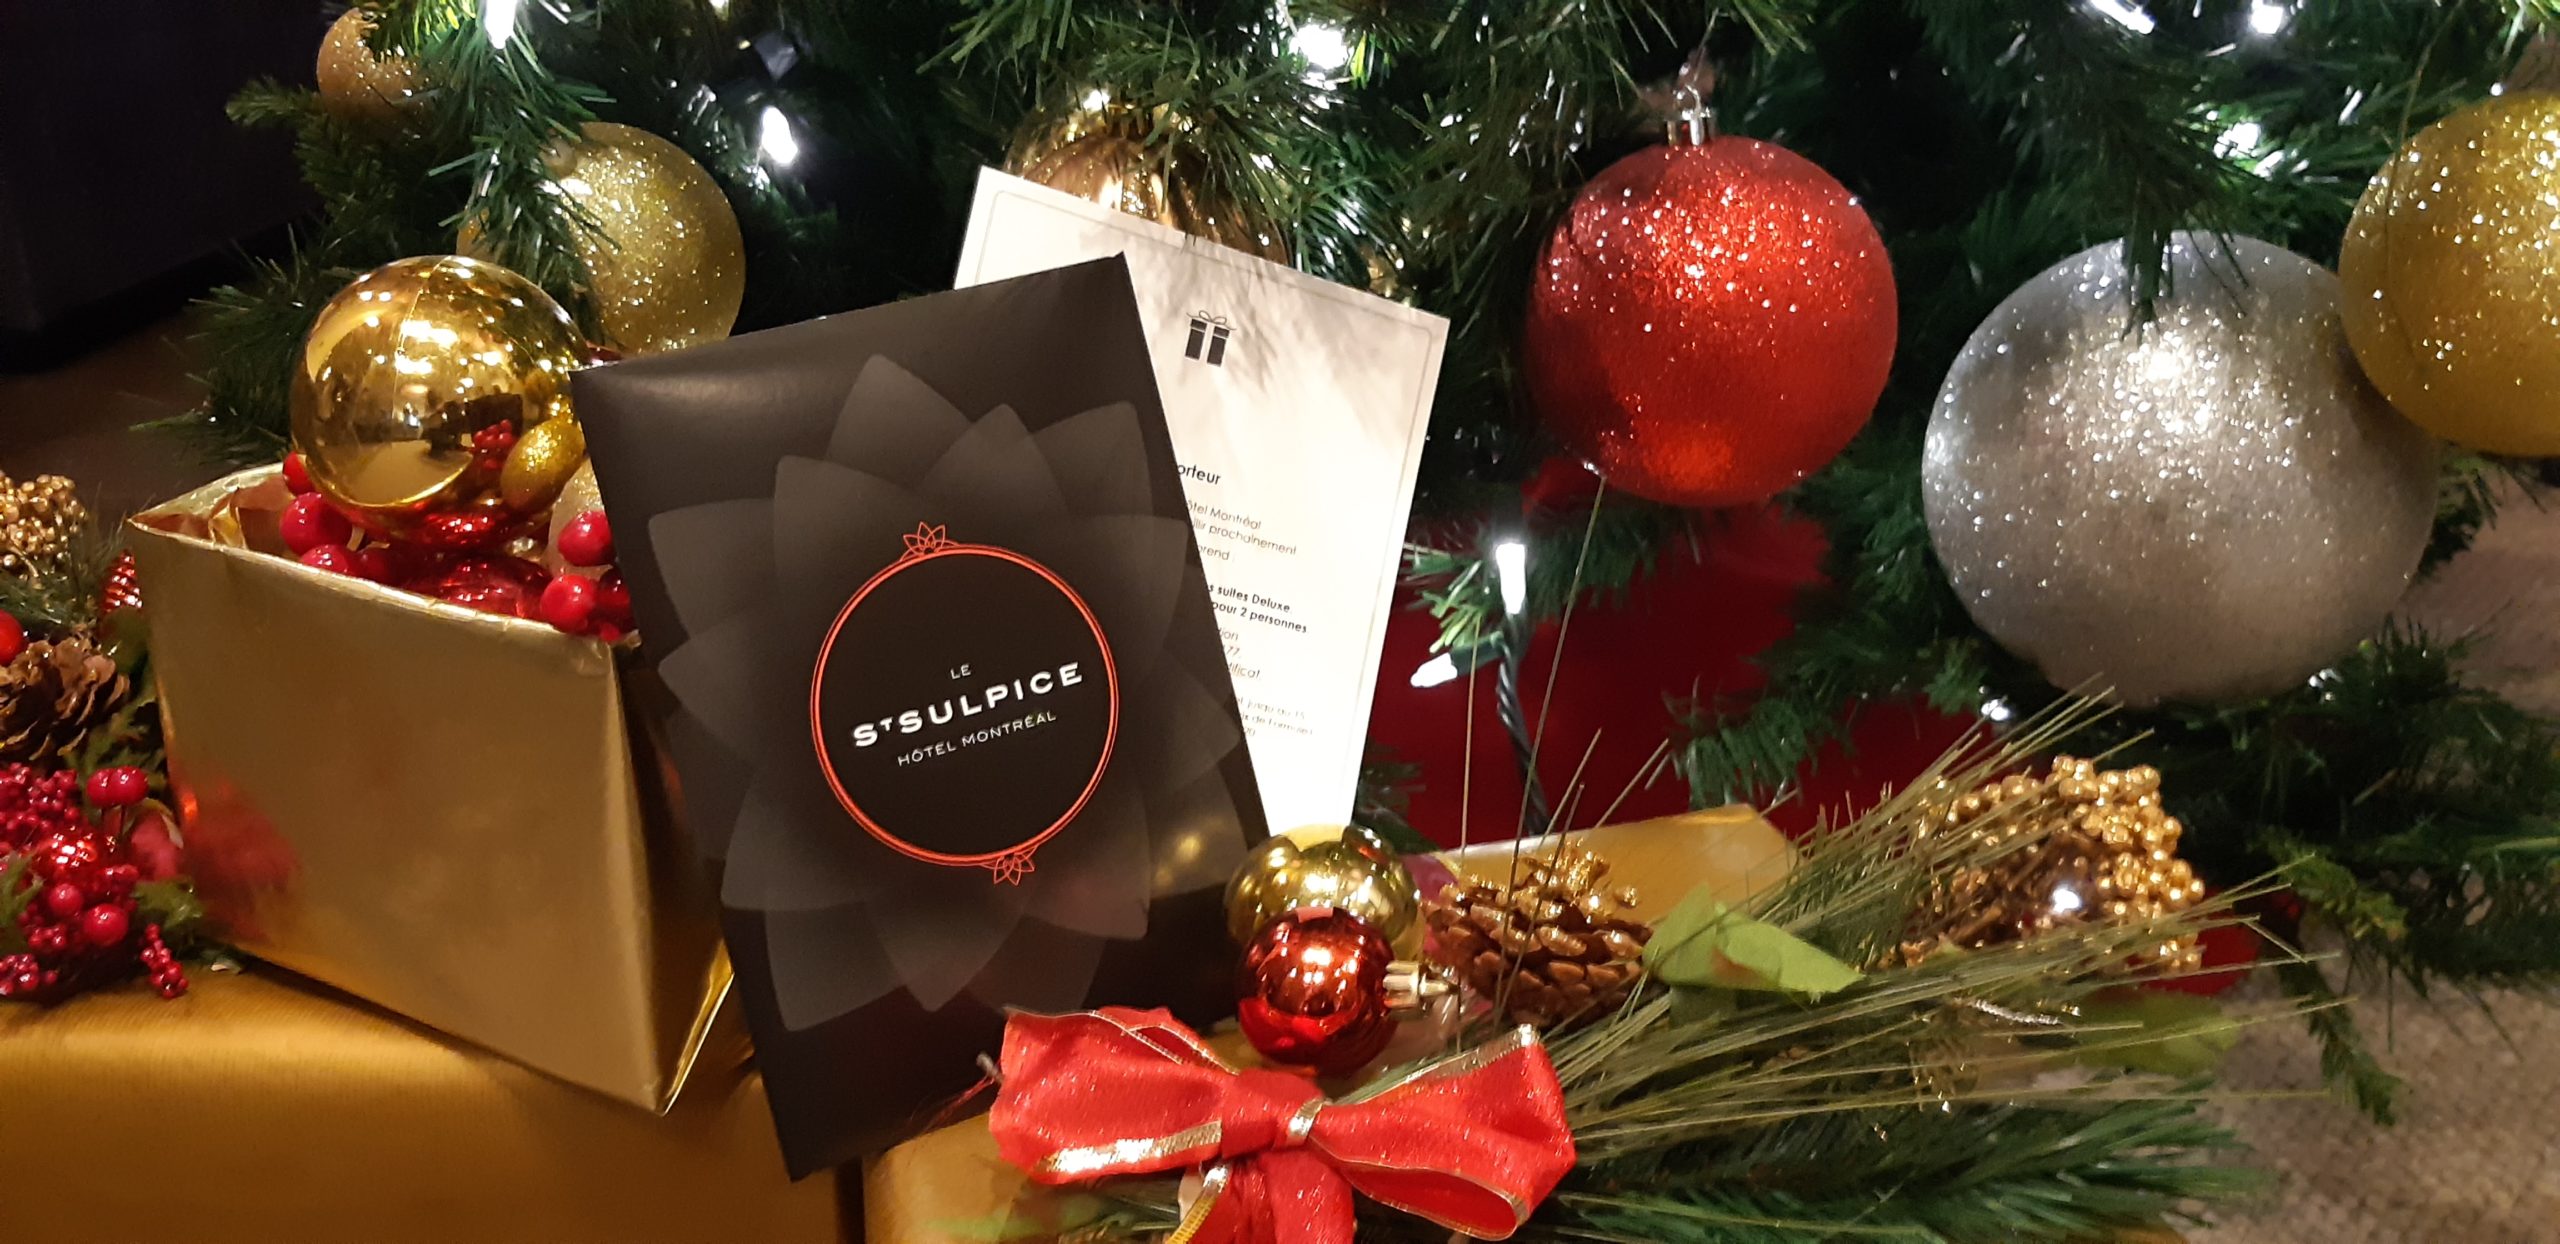 Christmas-gift-offer-gift-card-le-saint-sulpice-hotel